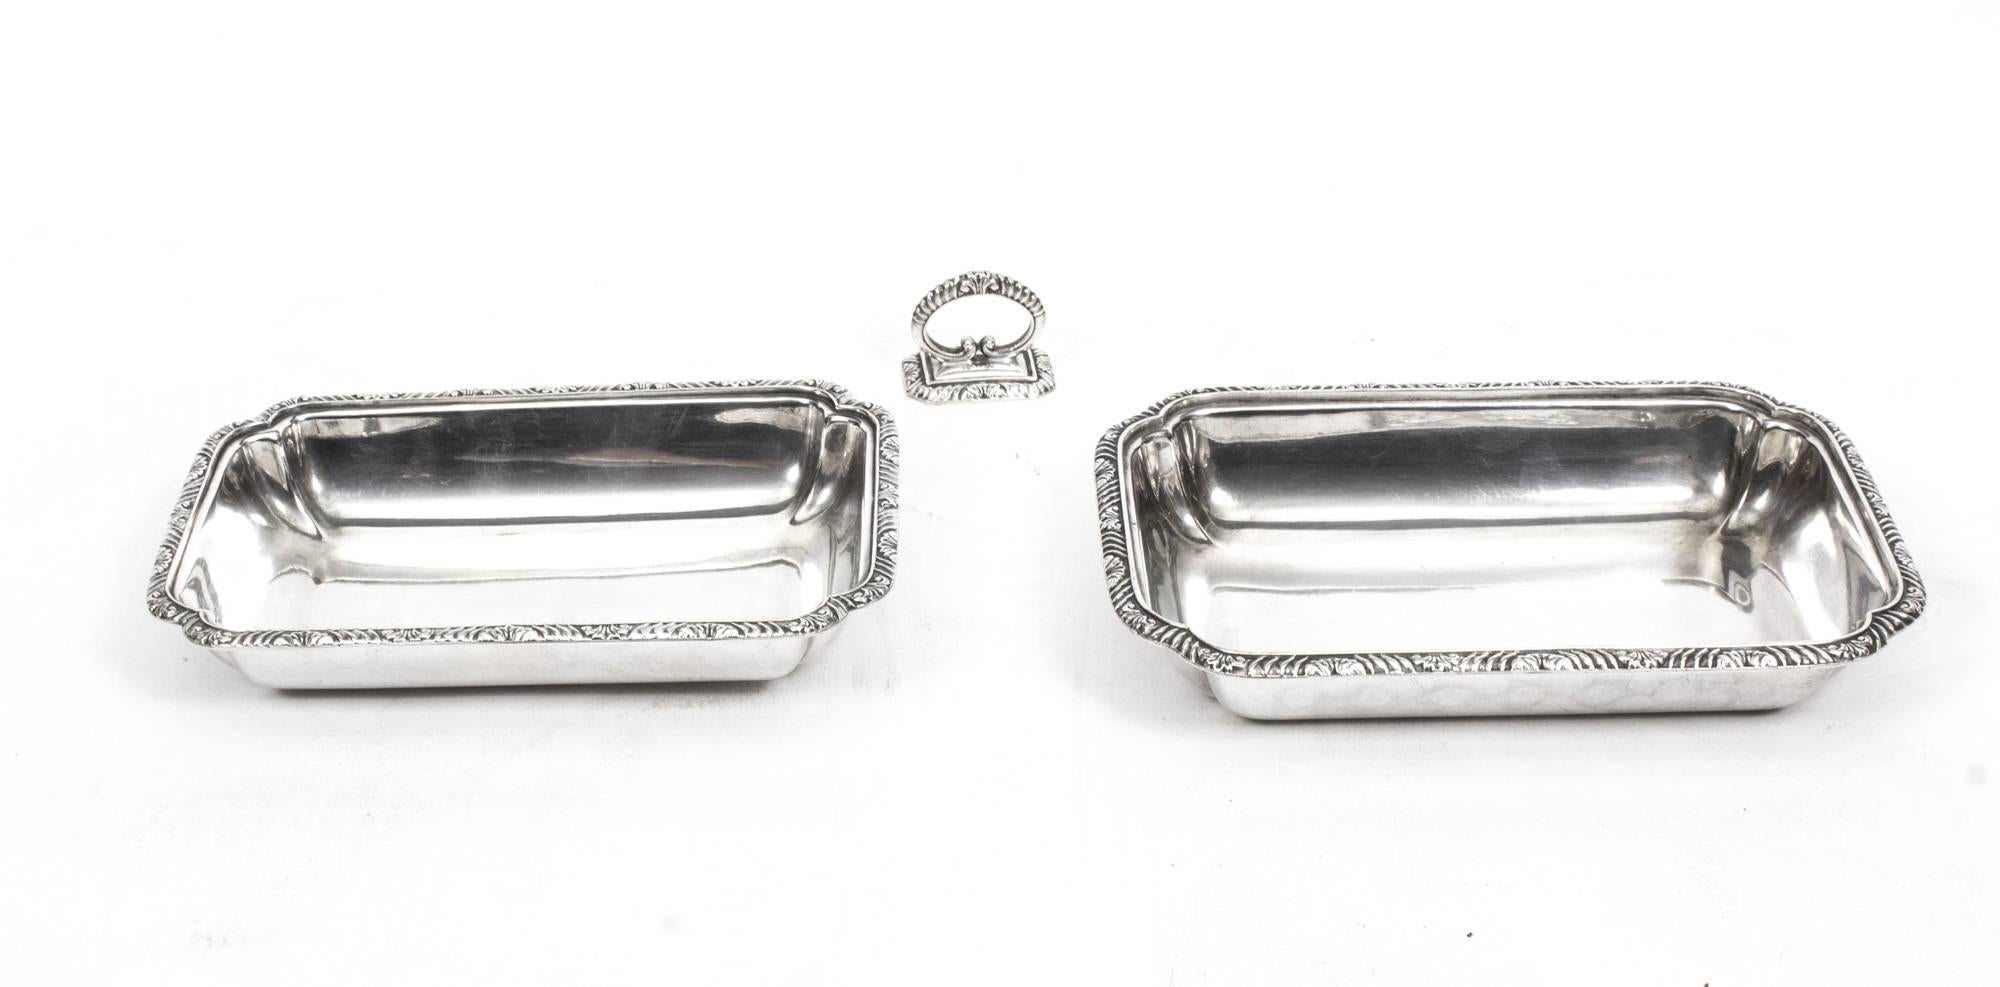 Silver Plate 19th Century Pair of Small Entree Dishes Joseph Rodgers